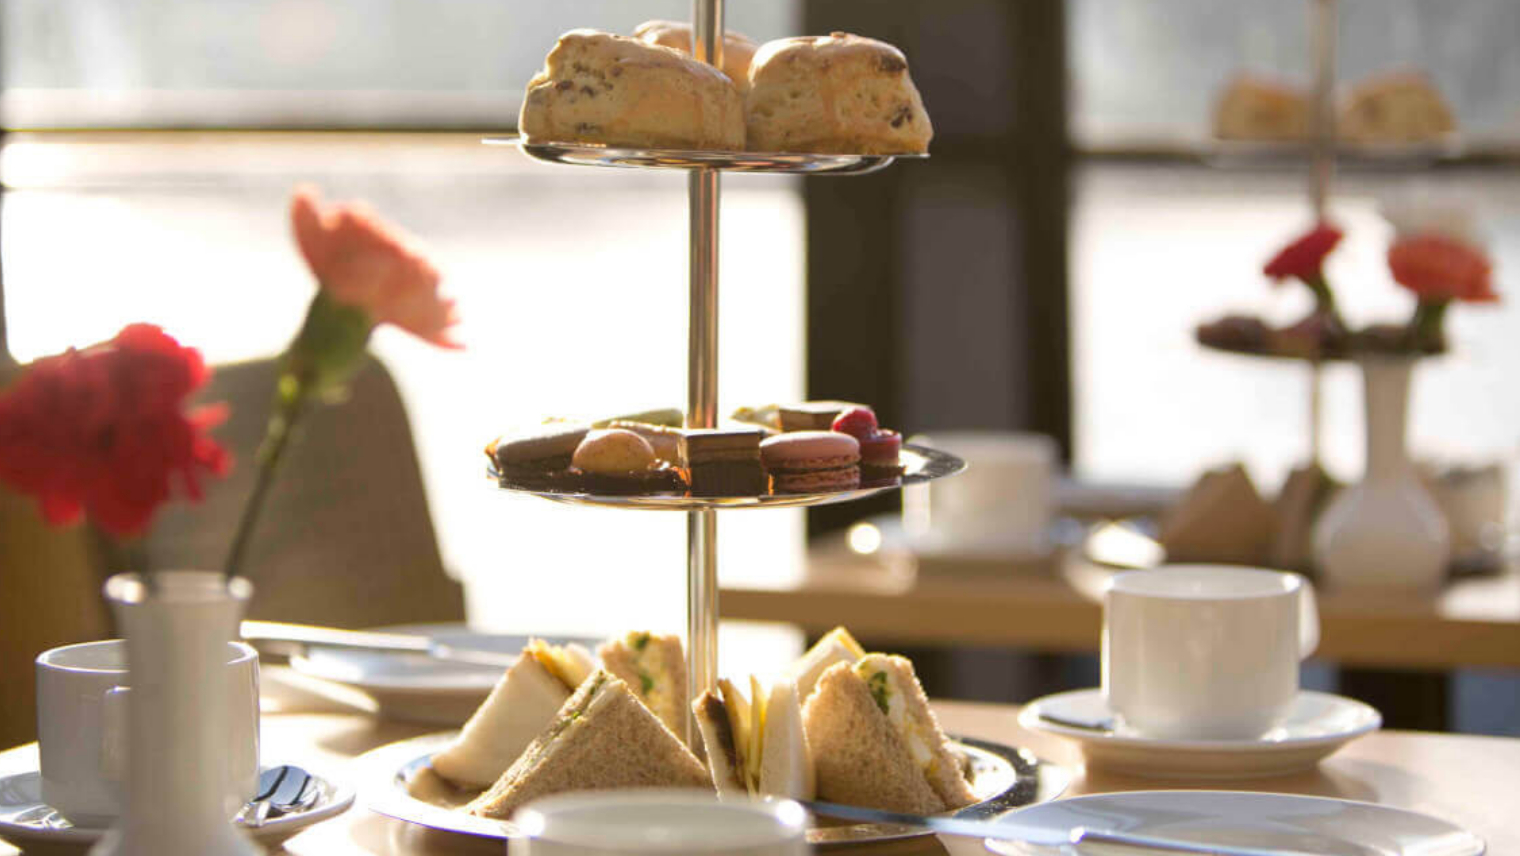 Afternoon tea served on a Thames Dinner Cruise